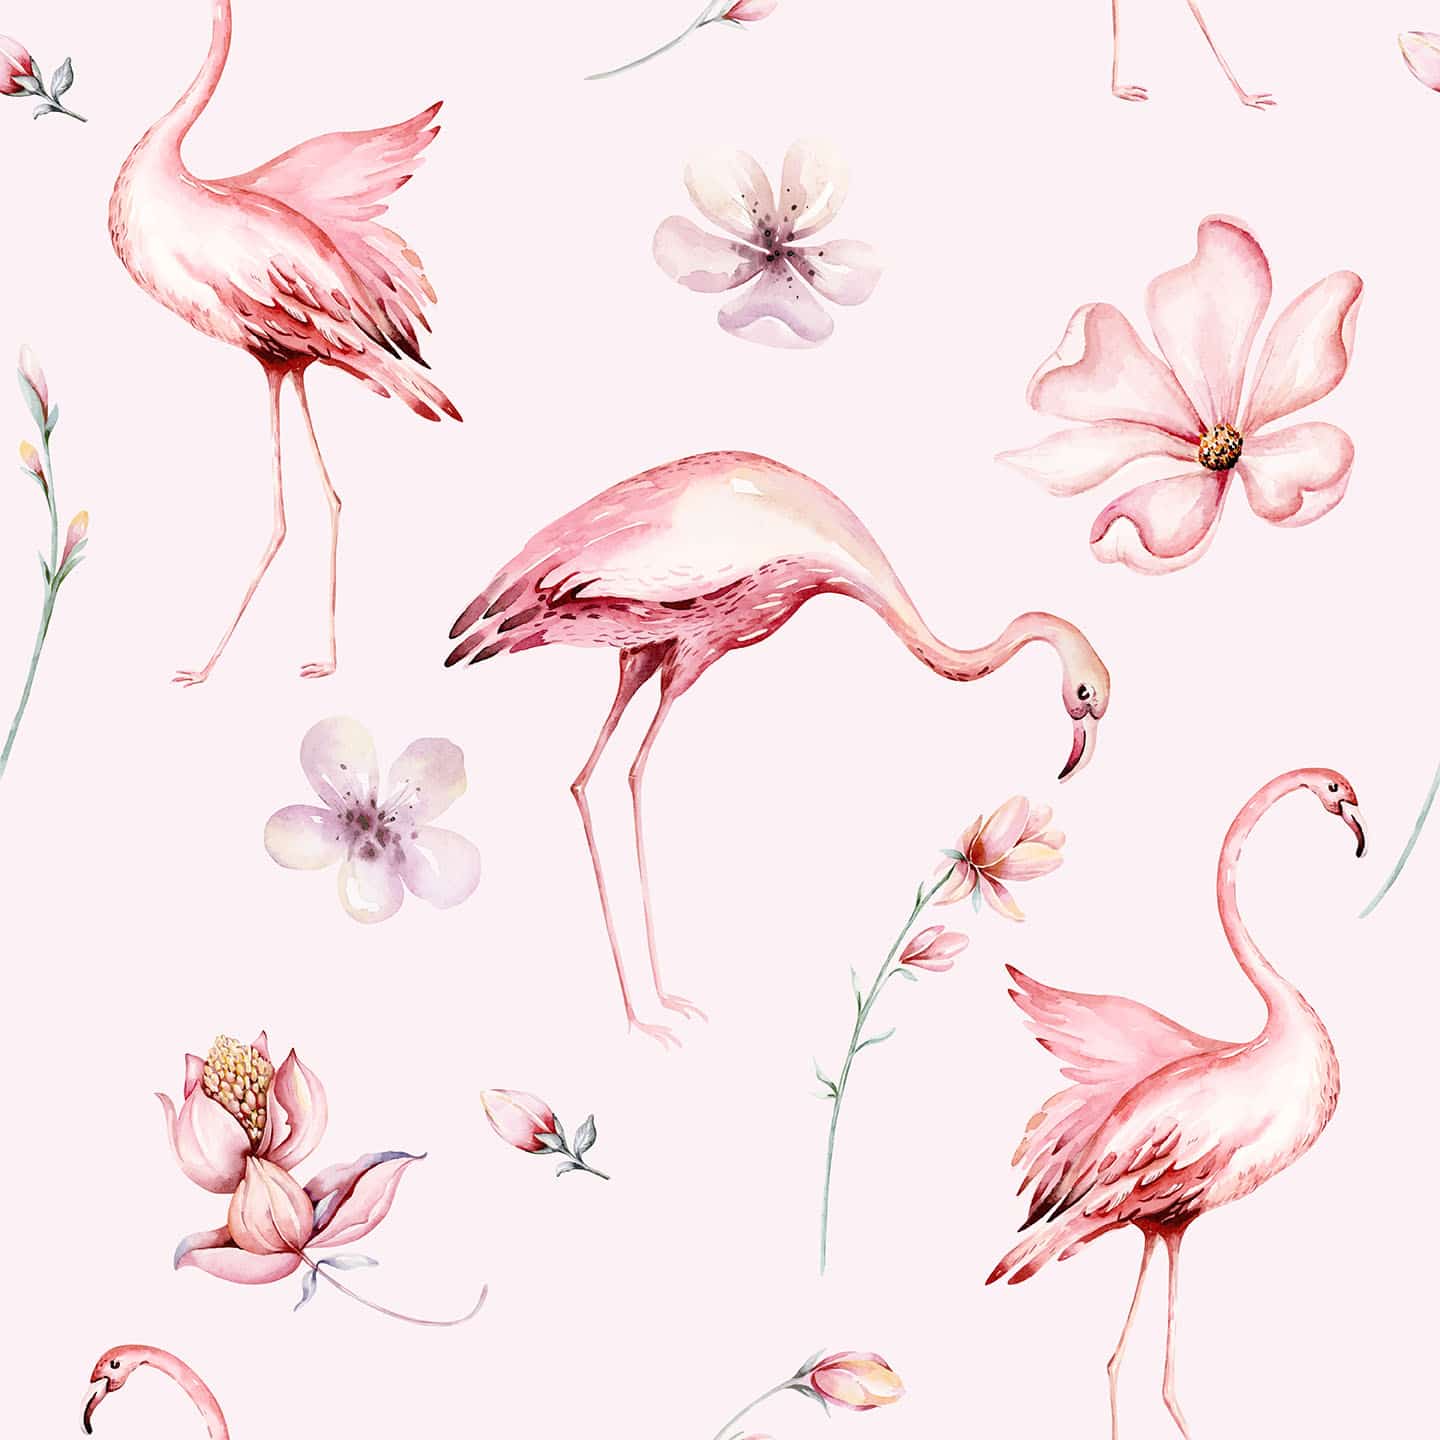 Aesthetic flamingo wallpaper - Peel and Stick or Non-Pasted